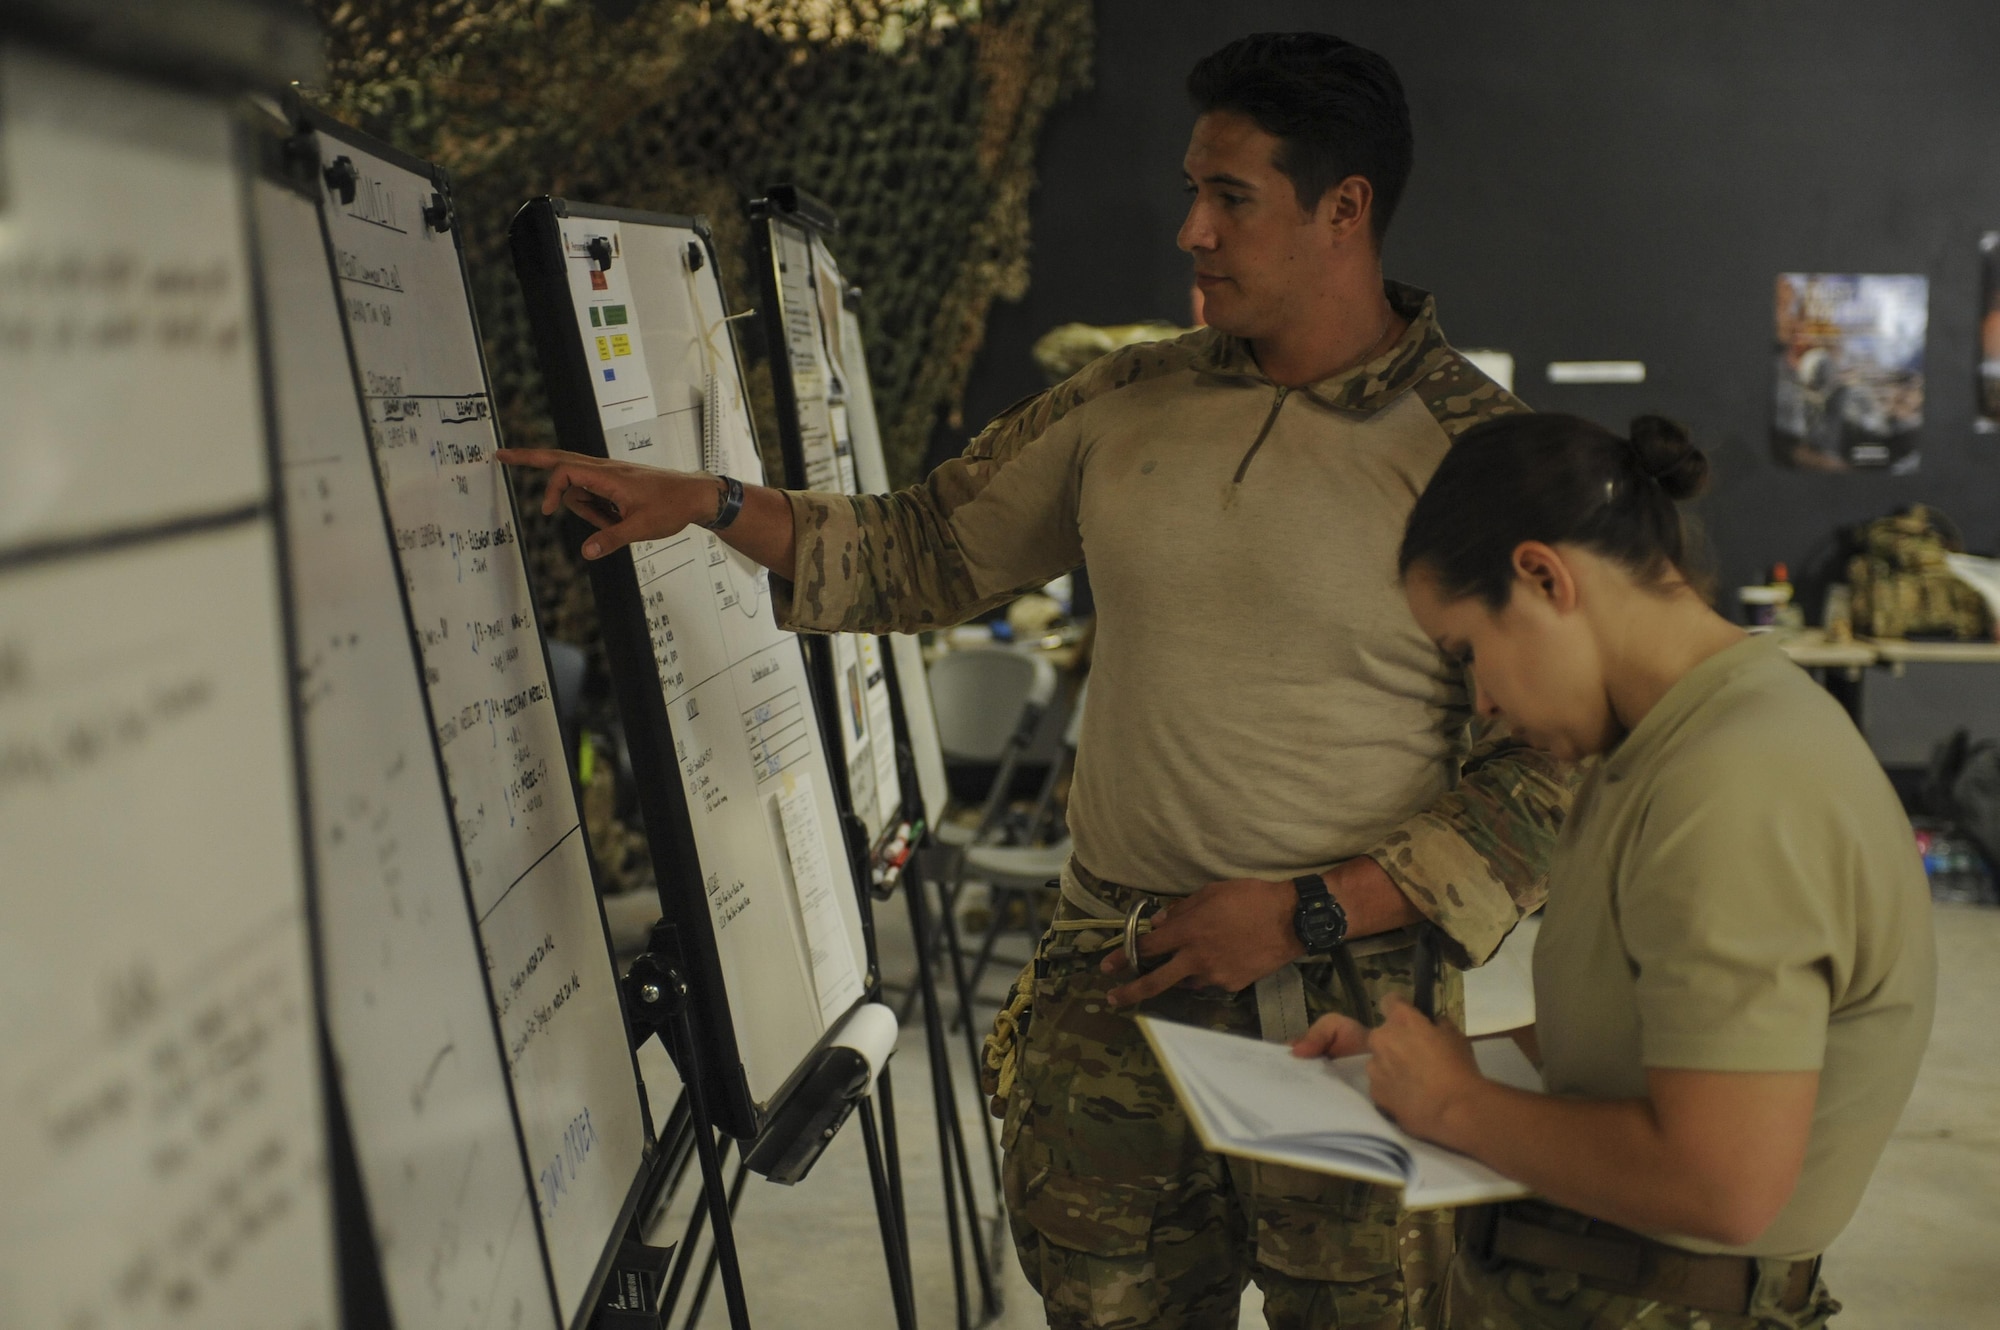 A U.S. Air Force Guardian Angel formal training unit instructor and support personnel plan for a mission during Combat Leaders Course training in Florence, Ariz., Aug. 30, 2016. Guardian Angel is comprised of combat rescue officers, pararescuemen, survival, evasion, resistance, and escape specialists and special trained support personnel dedicated to one of the Air Force’s primary functions of personnel recovery and combat search and rescue. (U.S. Air Force photo by Airman 1st Class Mya M. Crosby)